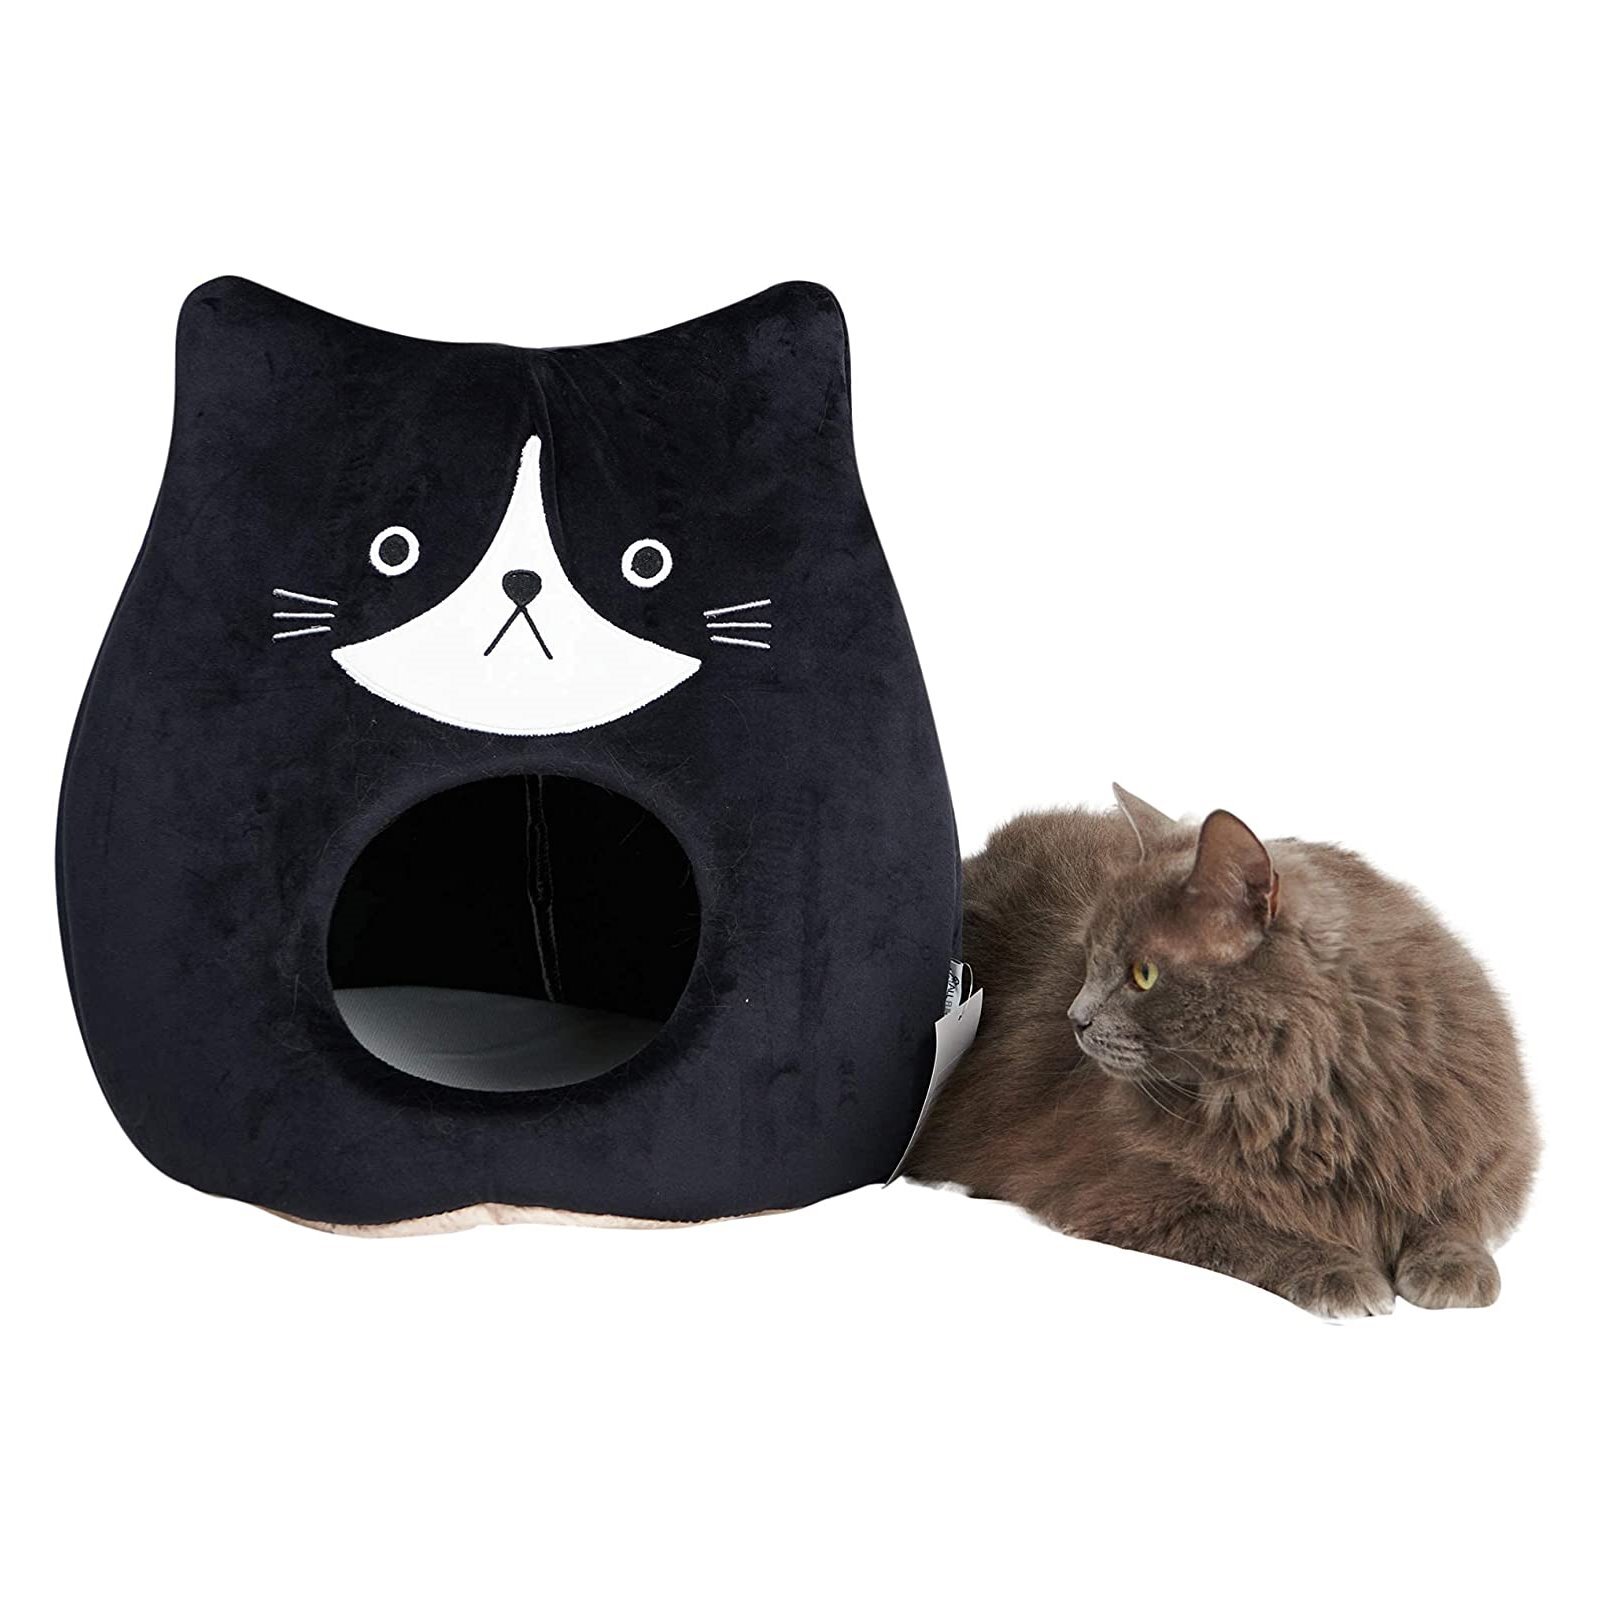 All Fur You Soft and Comfortable Cat Face Cat Cave Bed in Black image 0